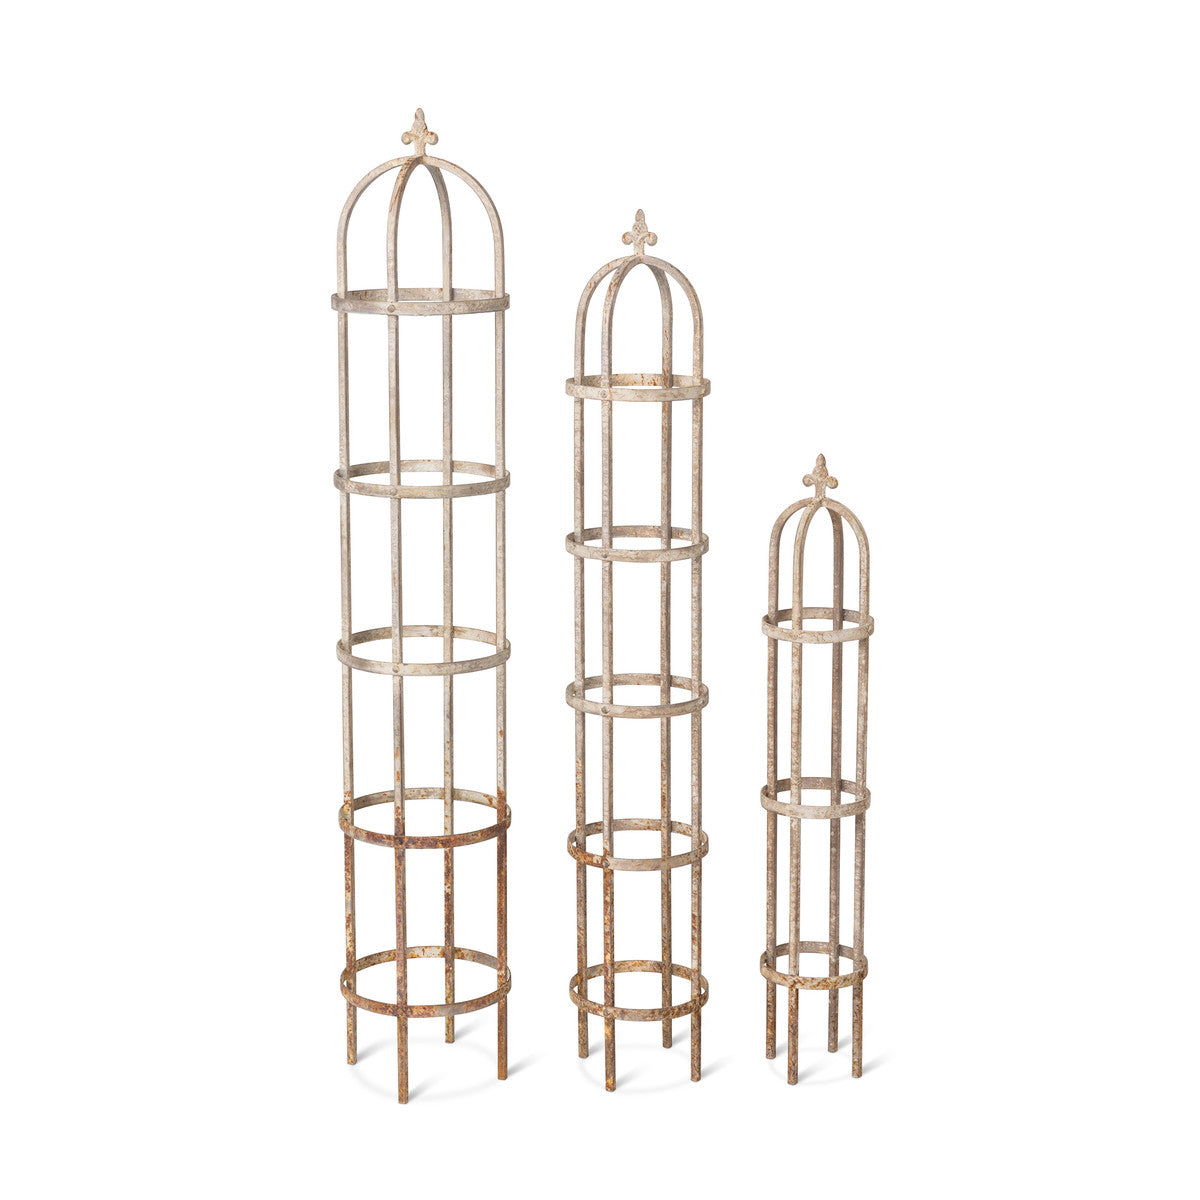 Plow & Hearth Two-Shelf Cast Iron Plant Stand with Birds